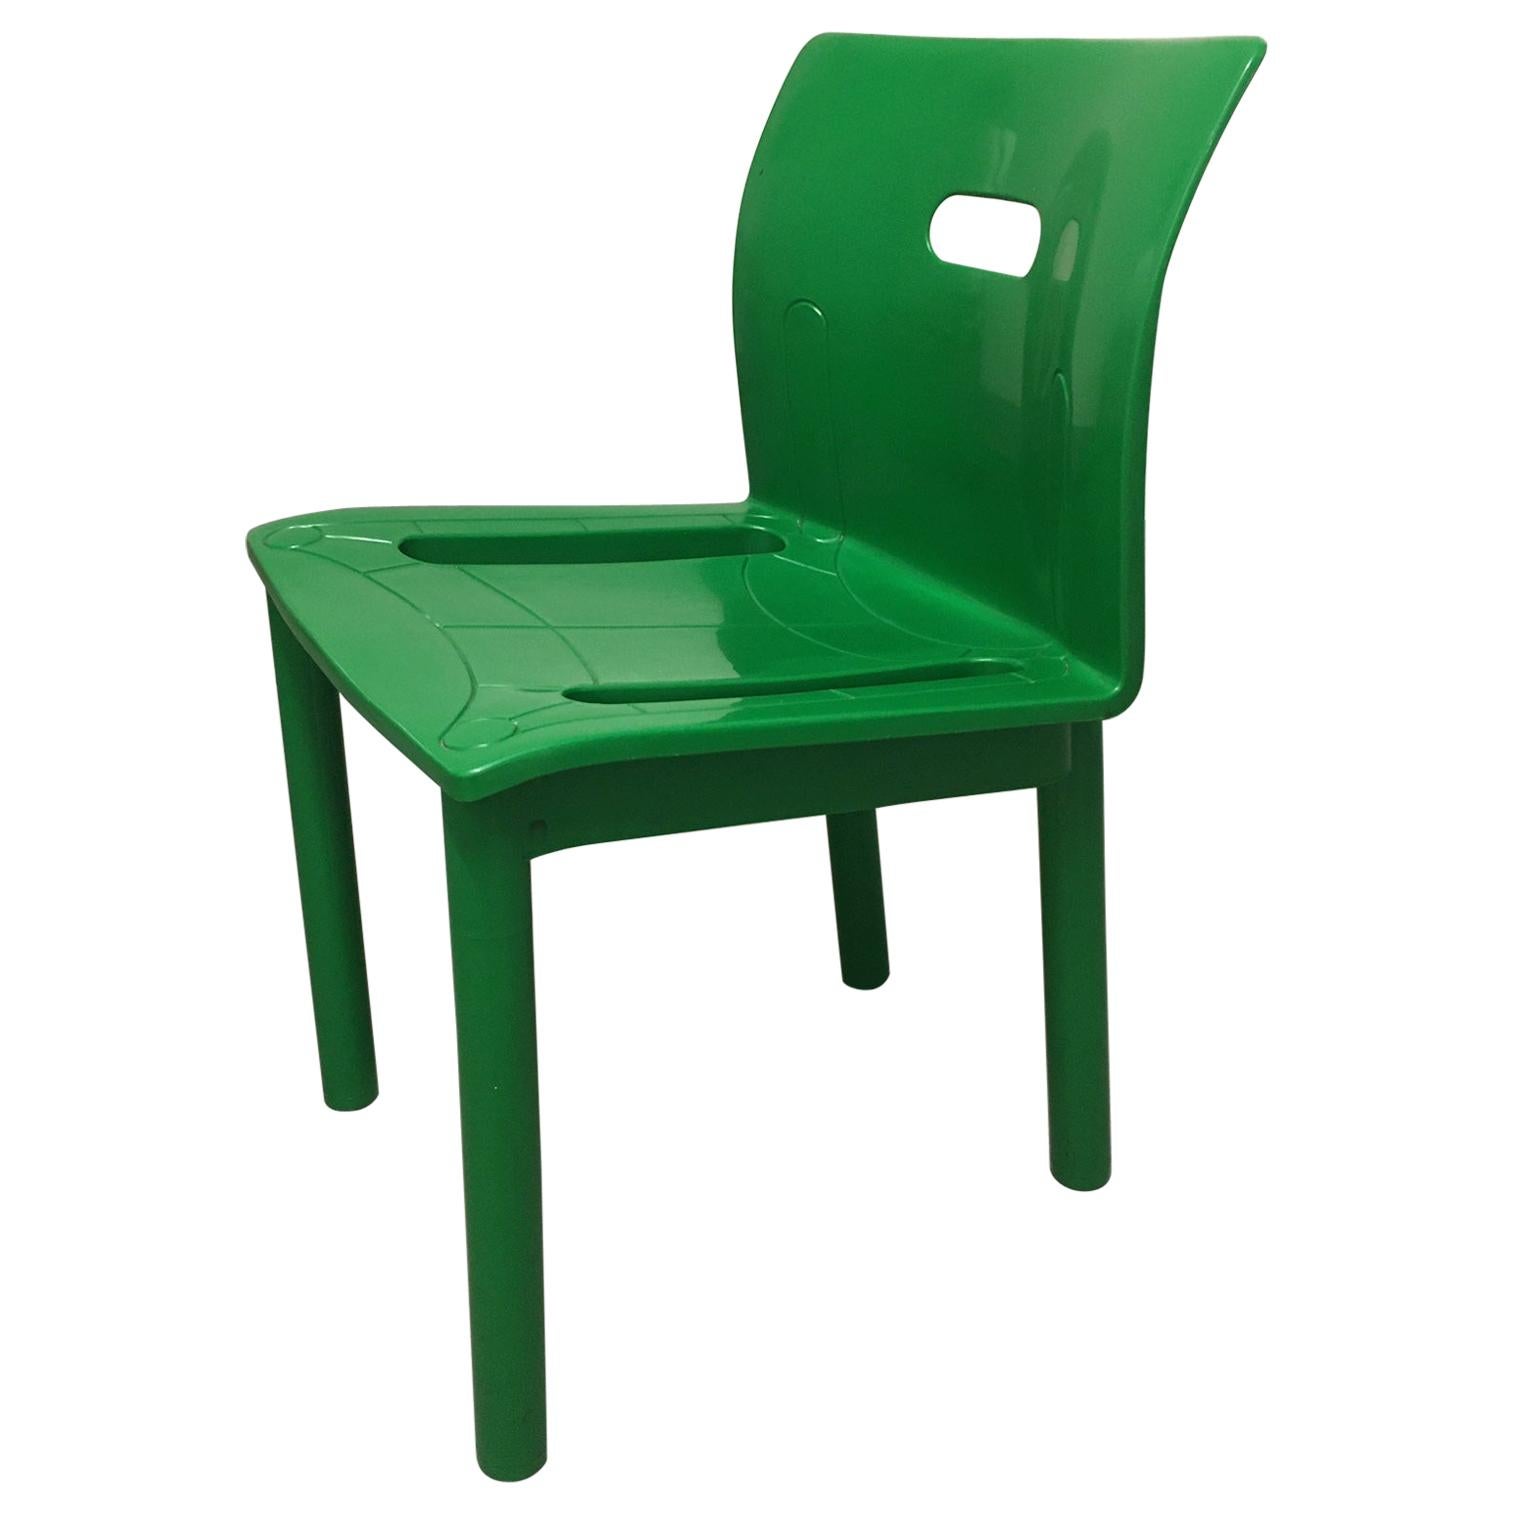 Vintage Plastic Stackable Chair by Anna Castelli Ferrieri, Kartell, Italy, 1986